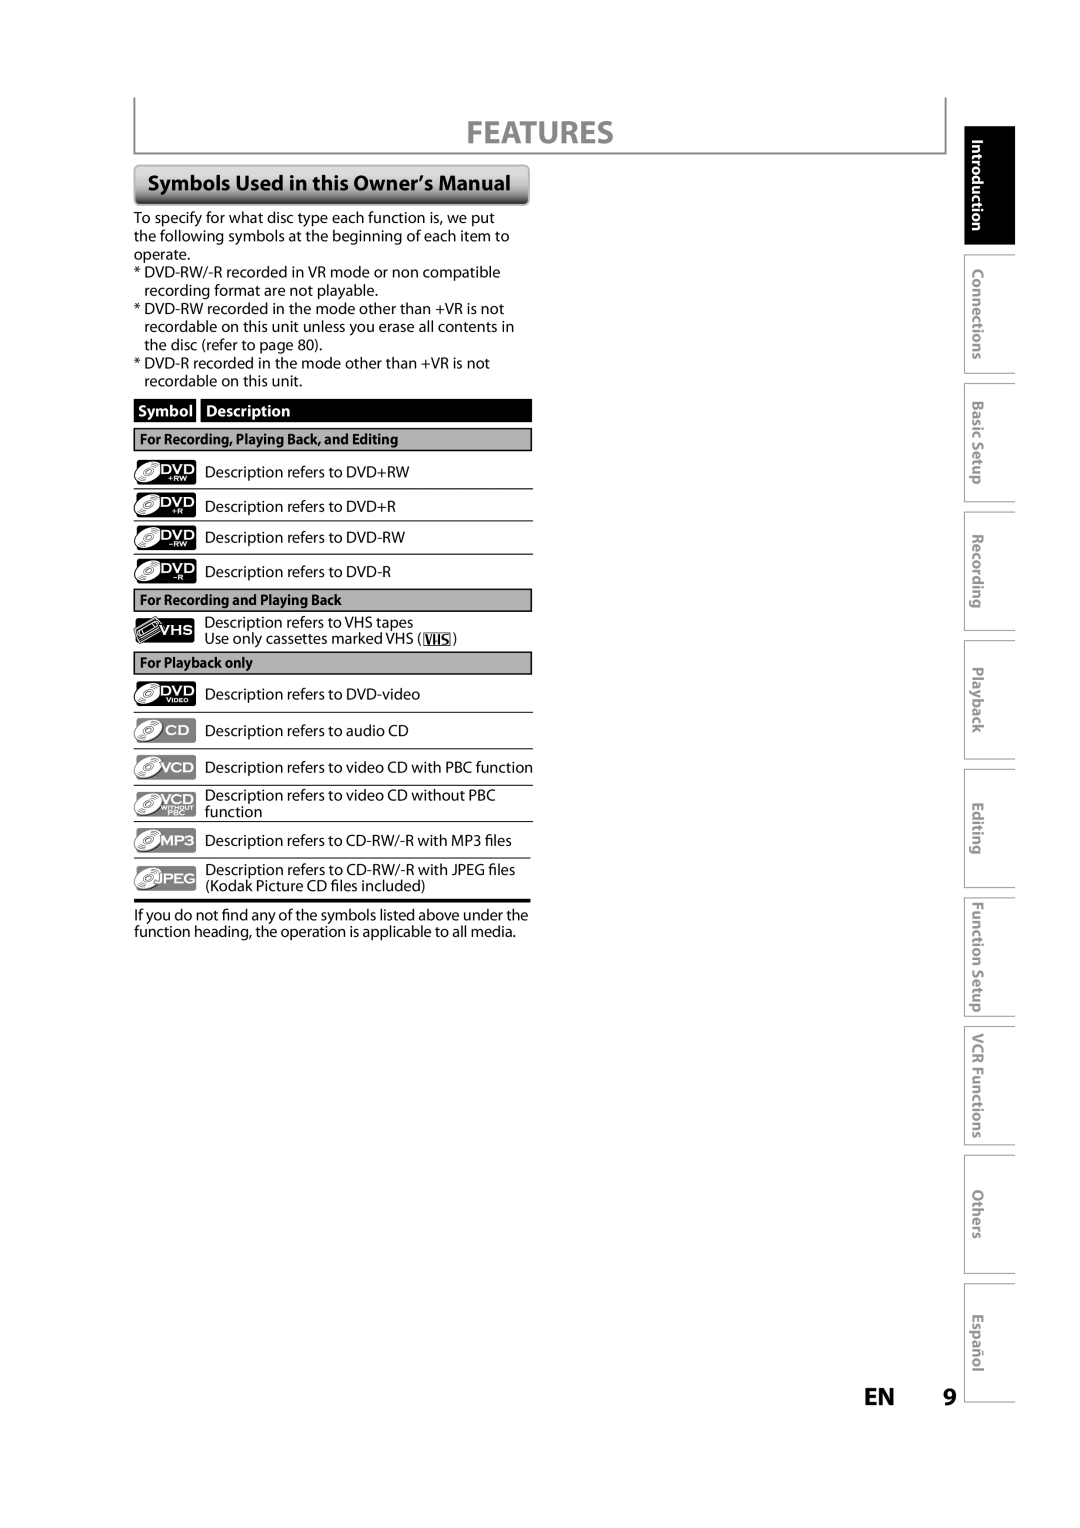 FUNAI ZV457MG9 A owner manual Features, Symbols Used in this Owner’s Manual, Symbol Description, Español 